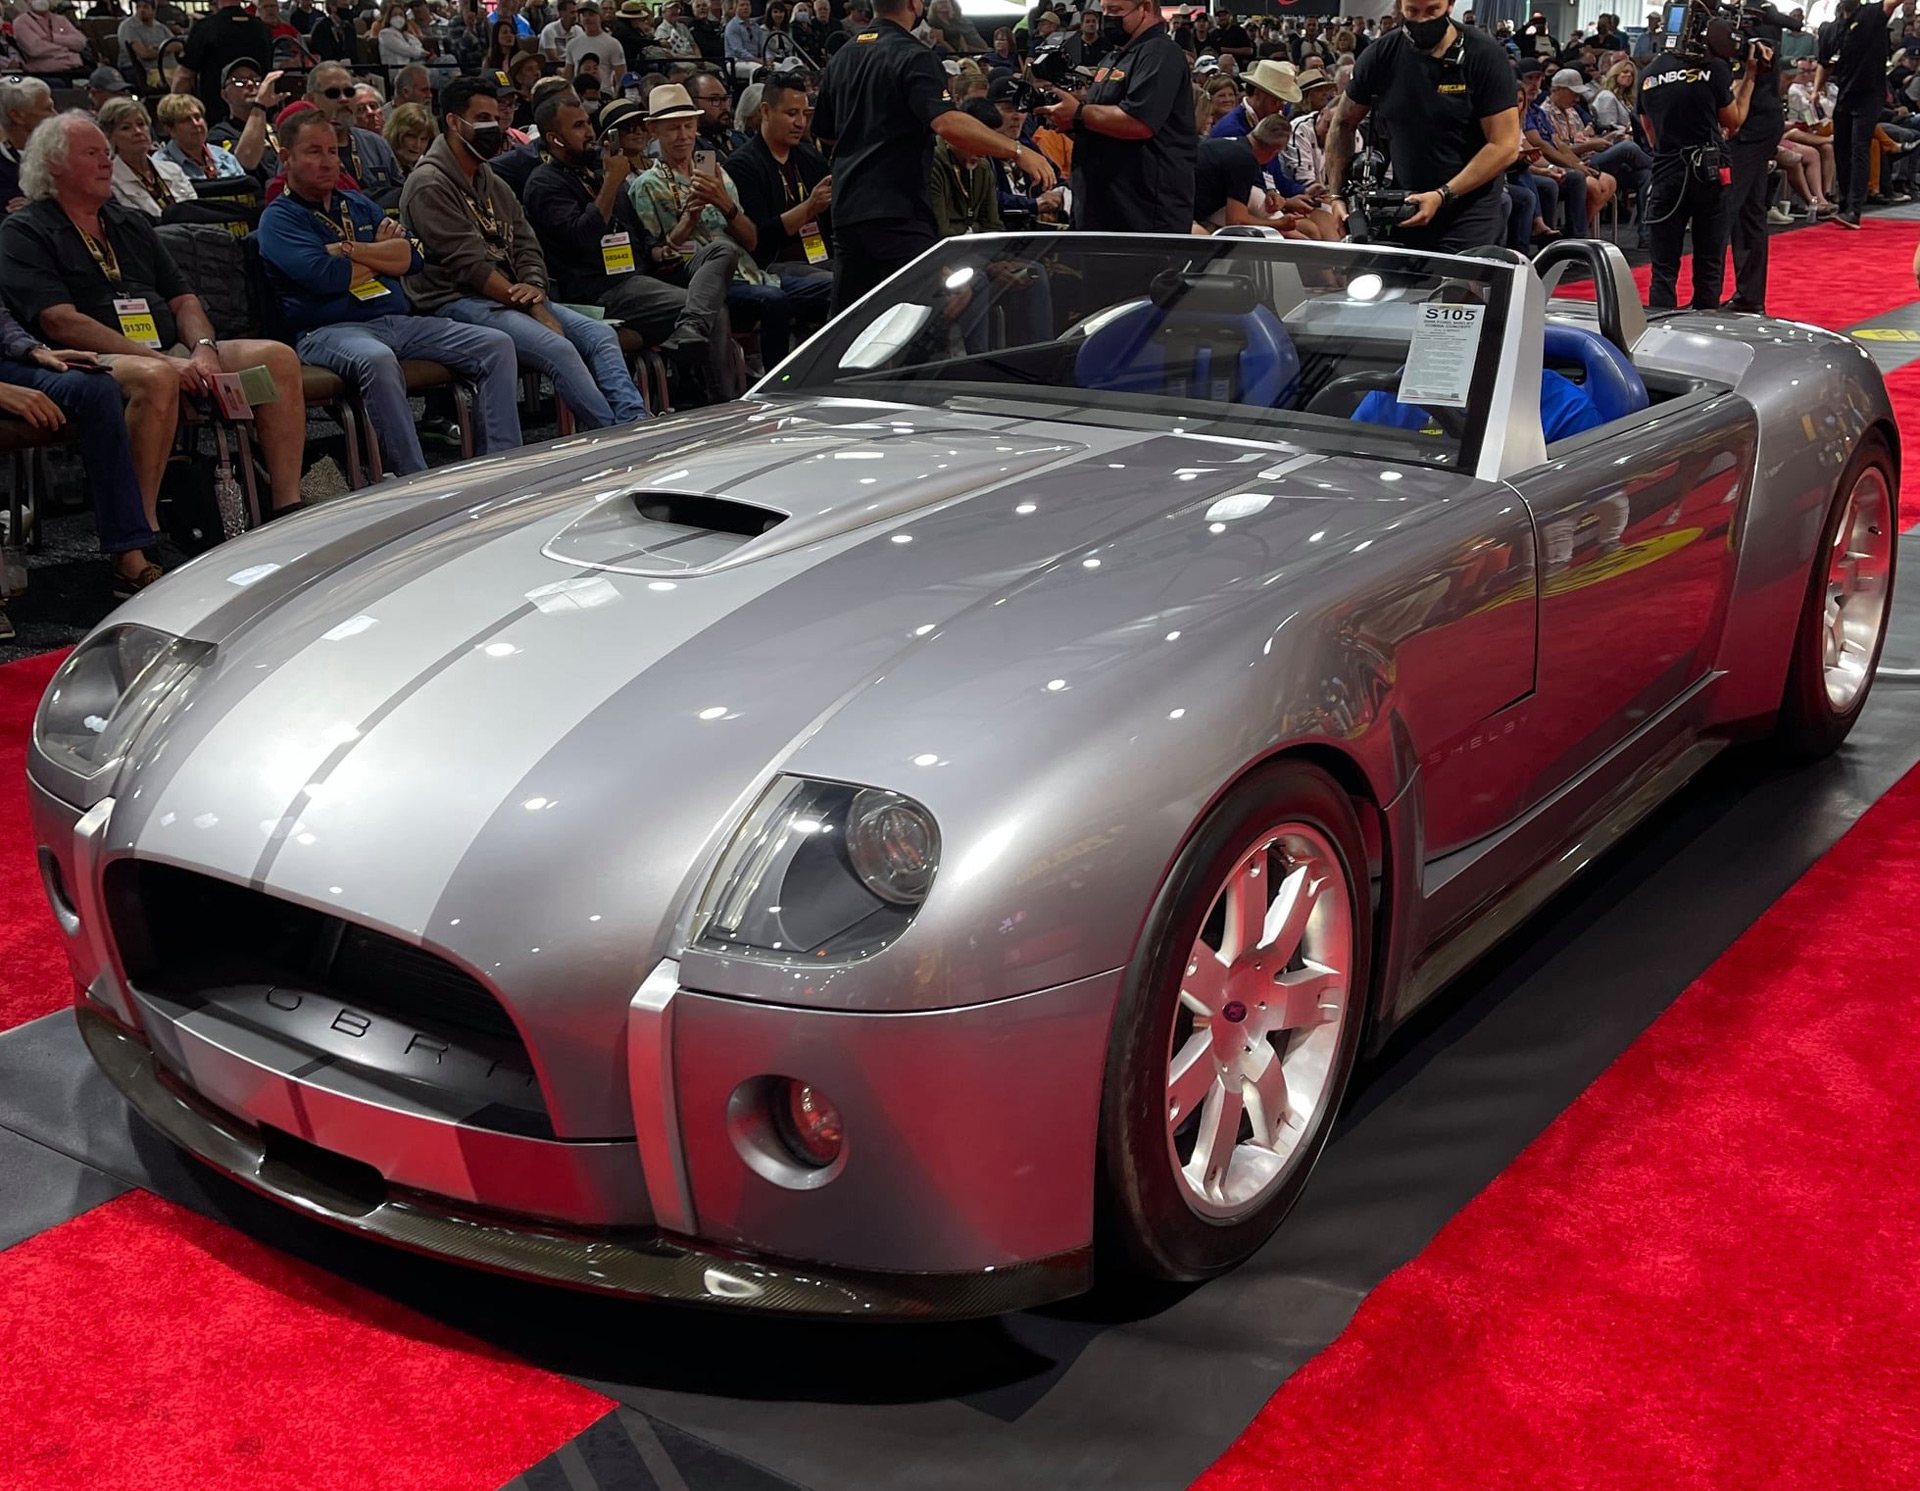 Ford Shelby Cobra concept fetches 2.64M at Monterey auction